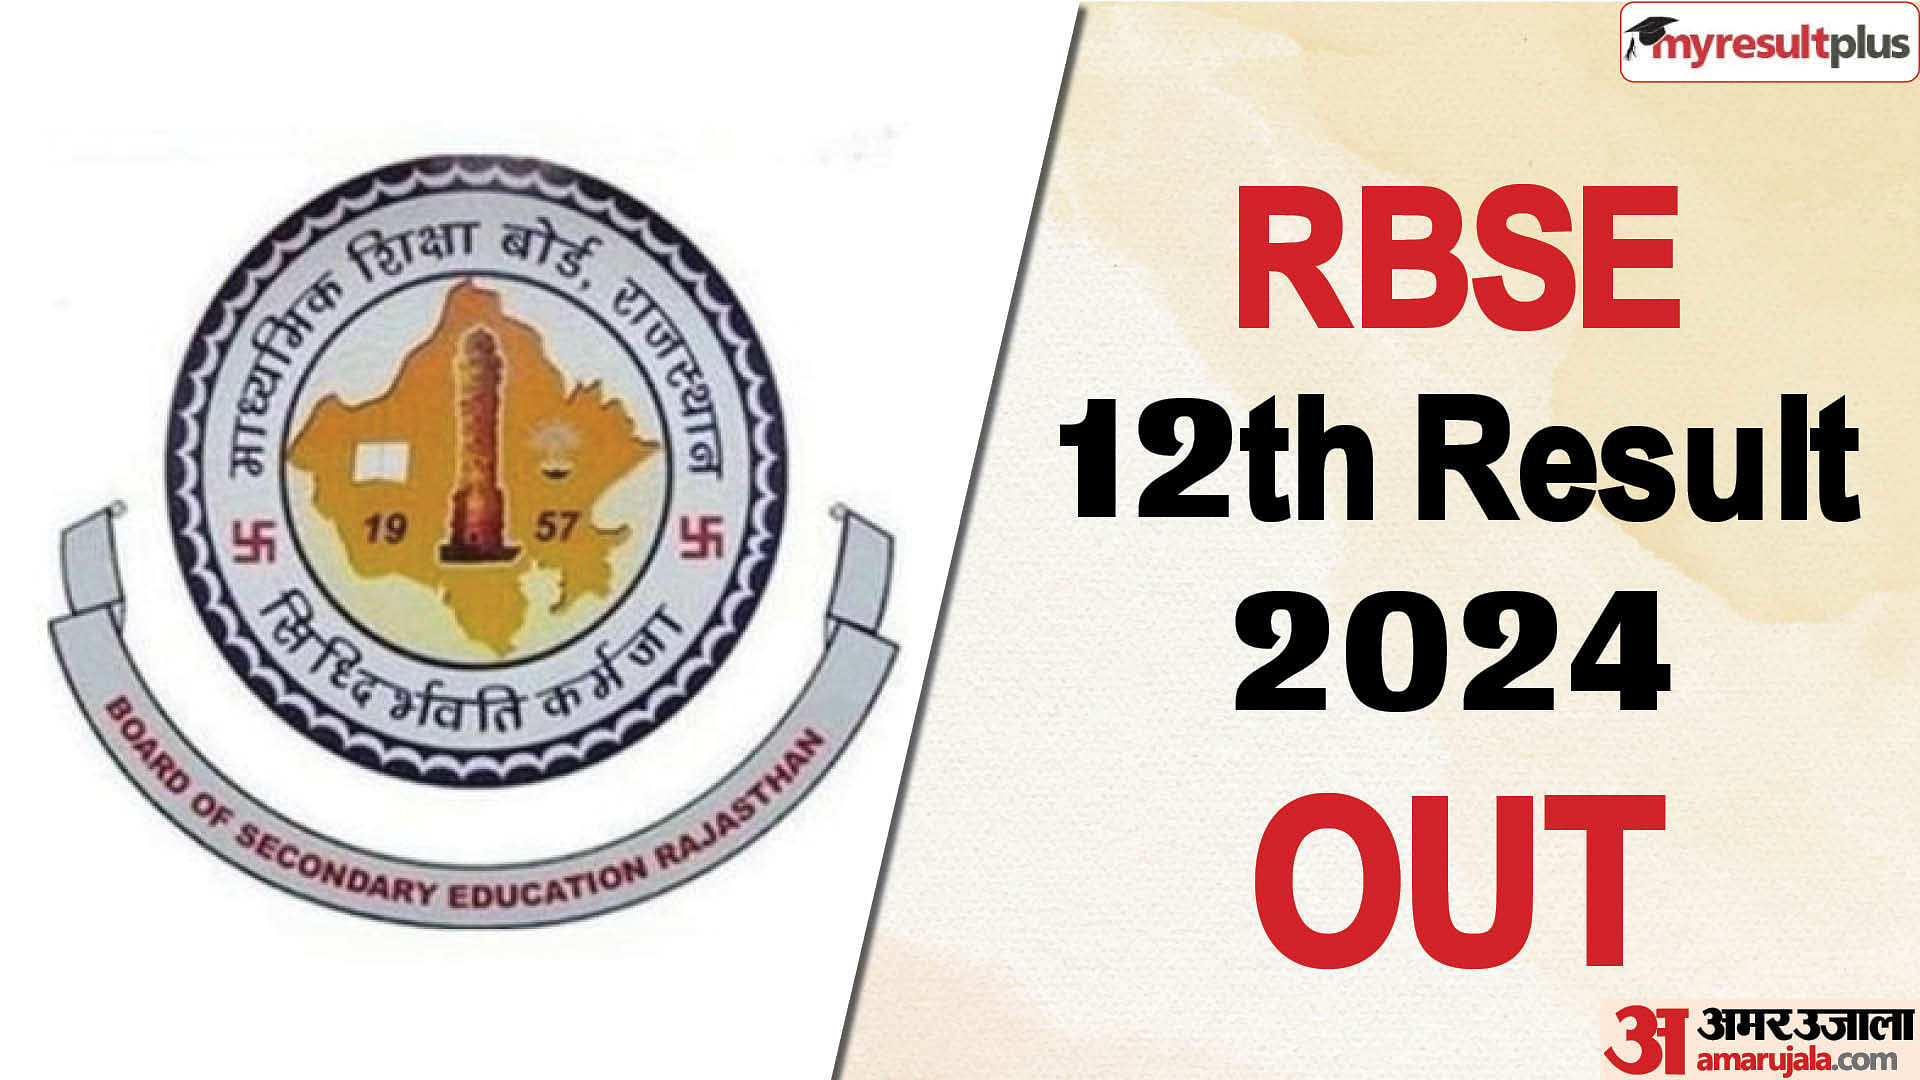 RBSE 12th result 2024 out now, Check overall pass percentage and toppers name here